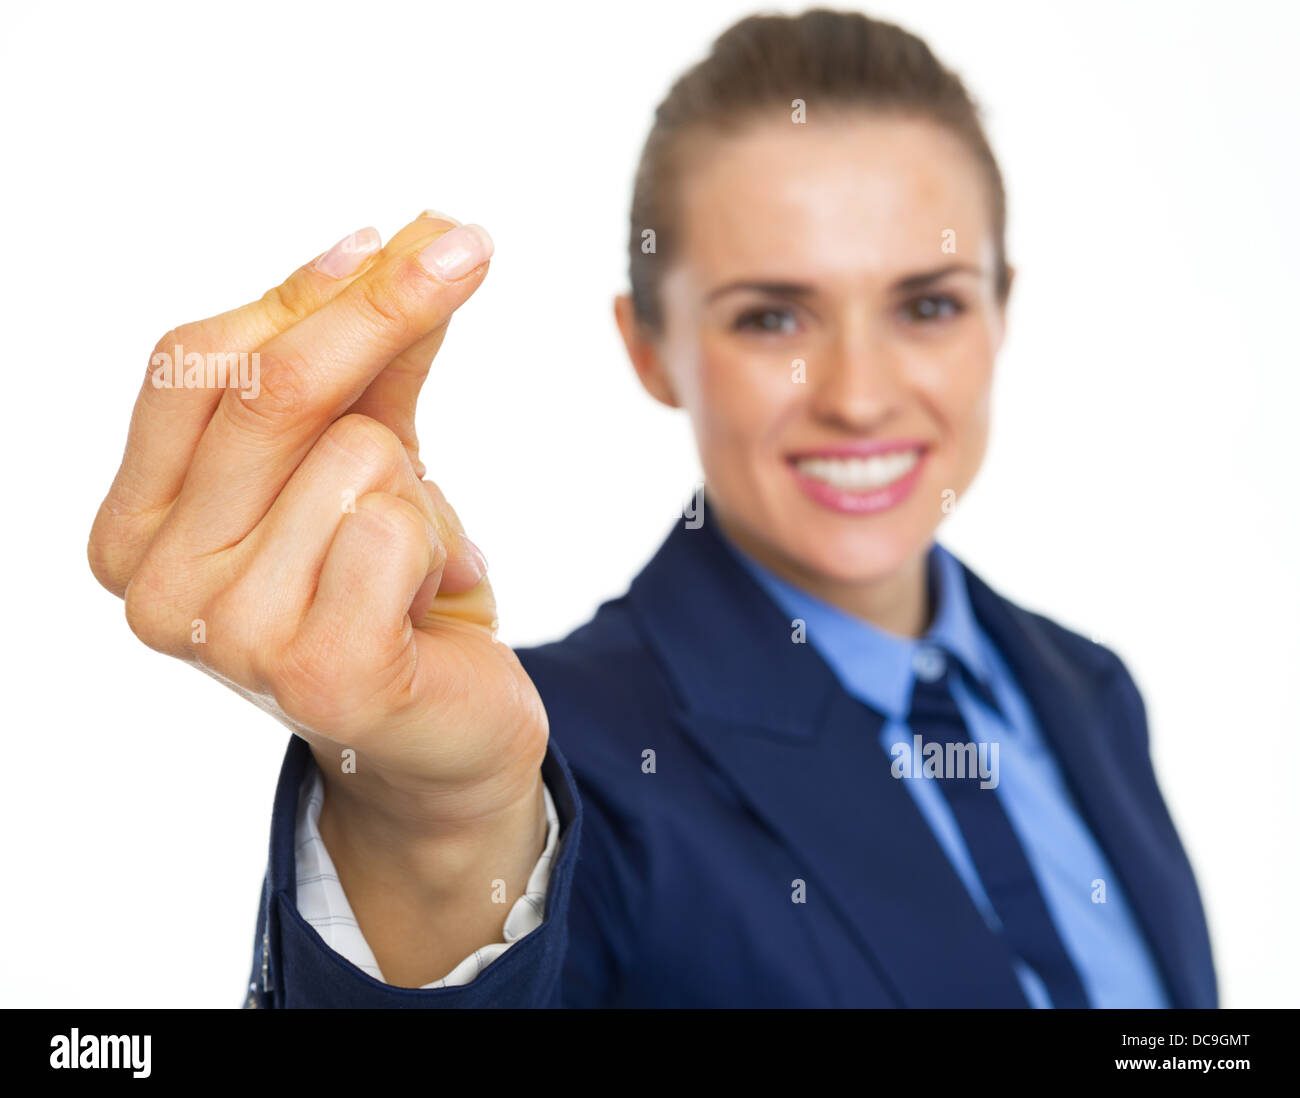 Closeup on snapping fingers Stock Photo